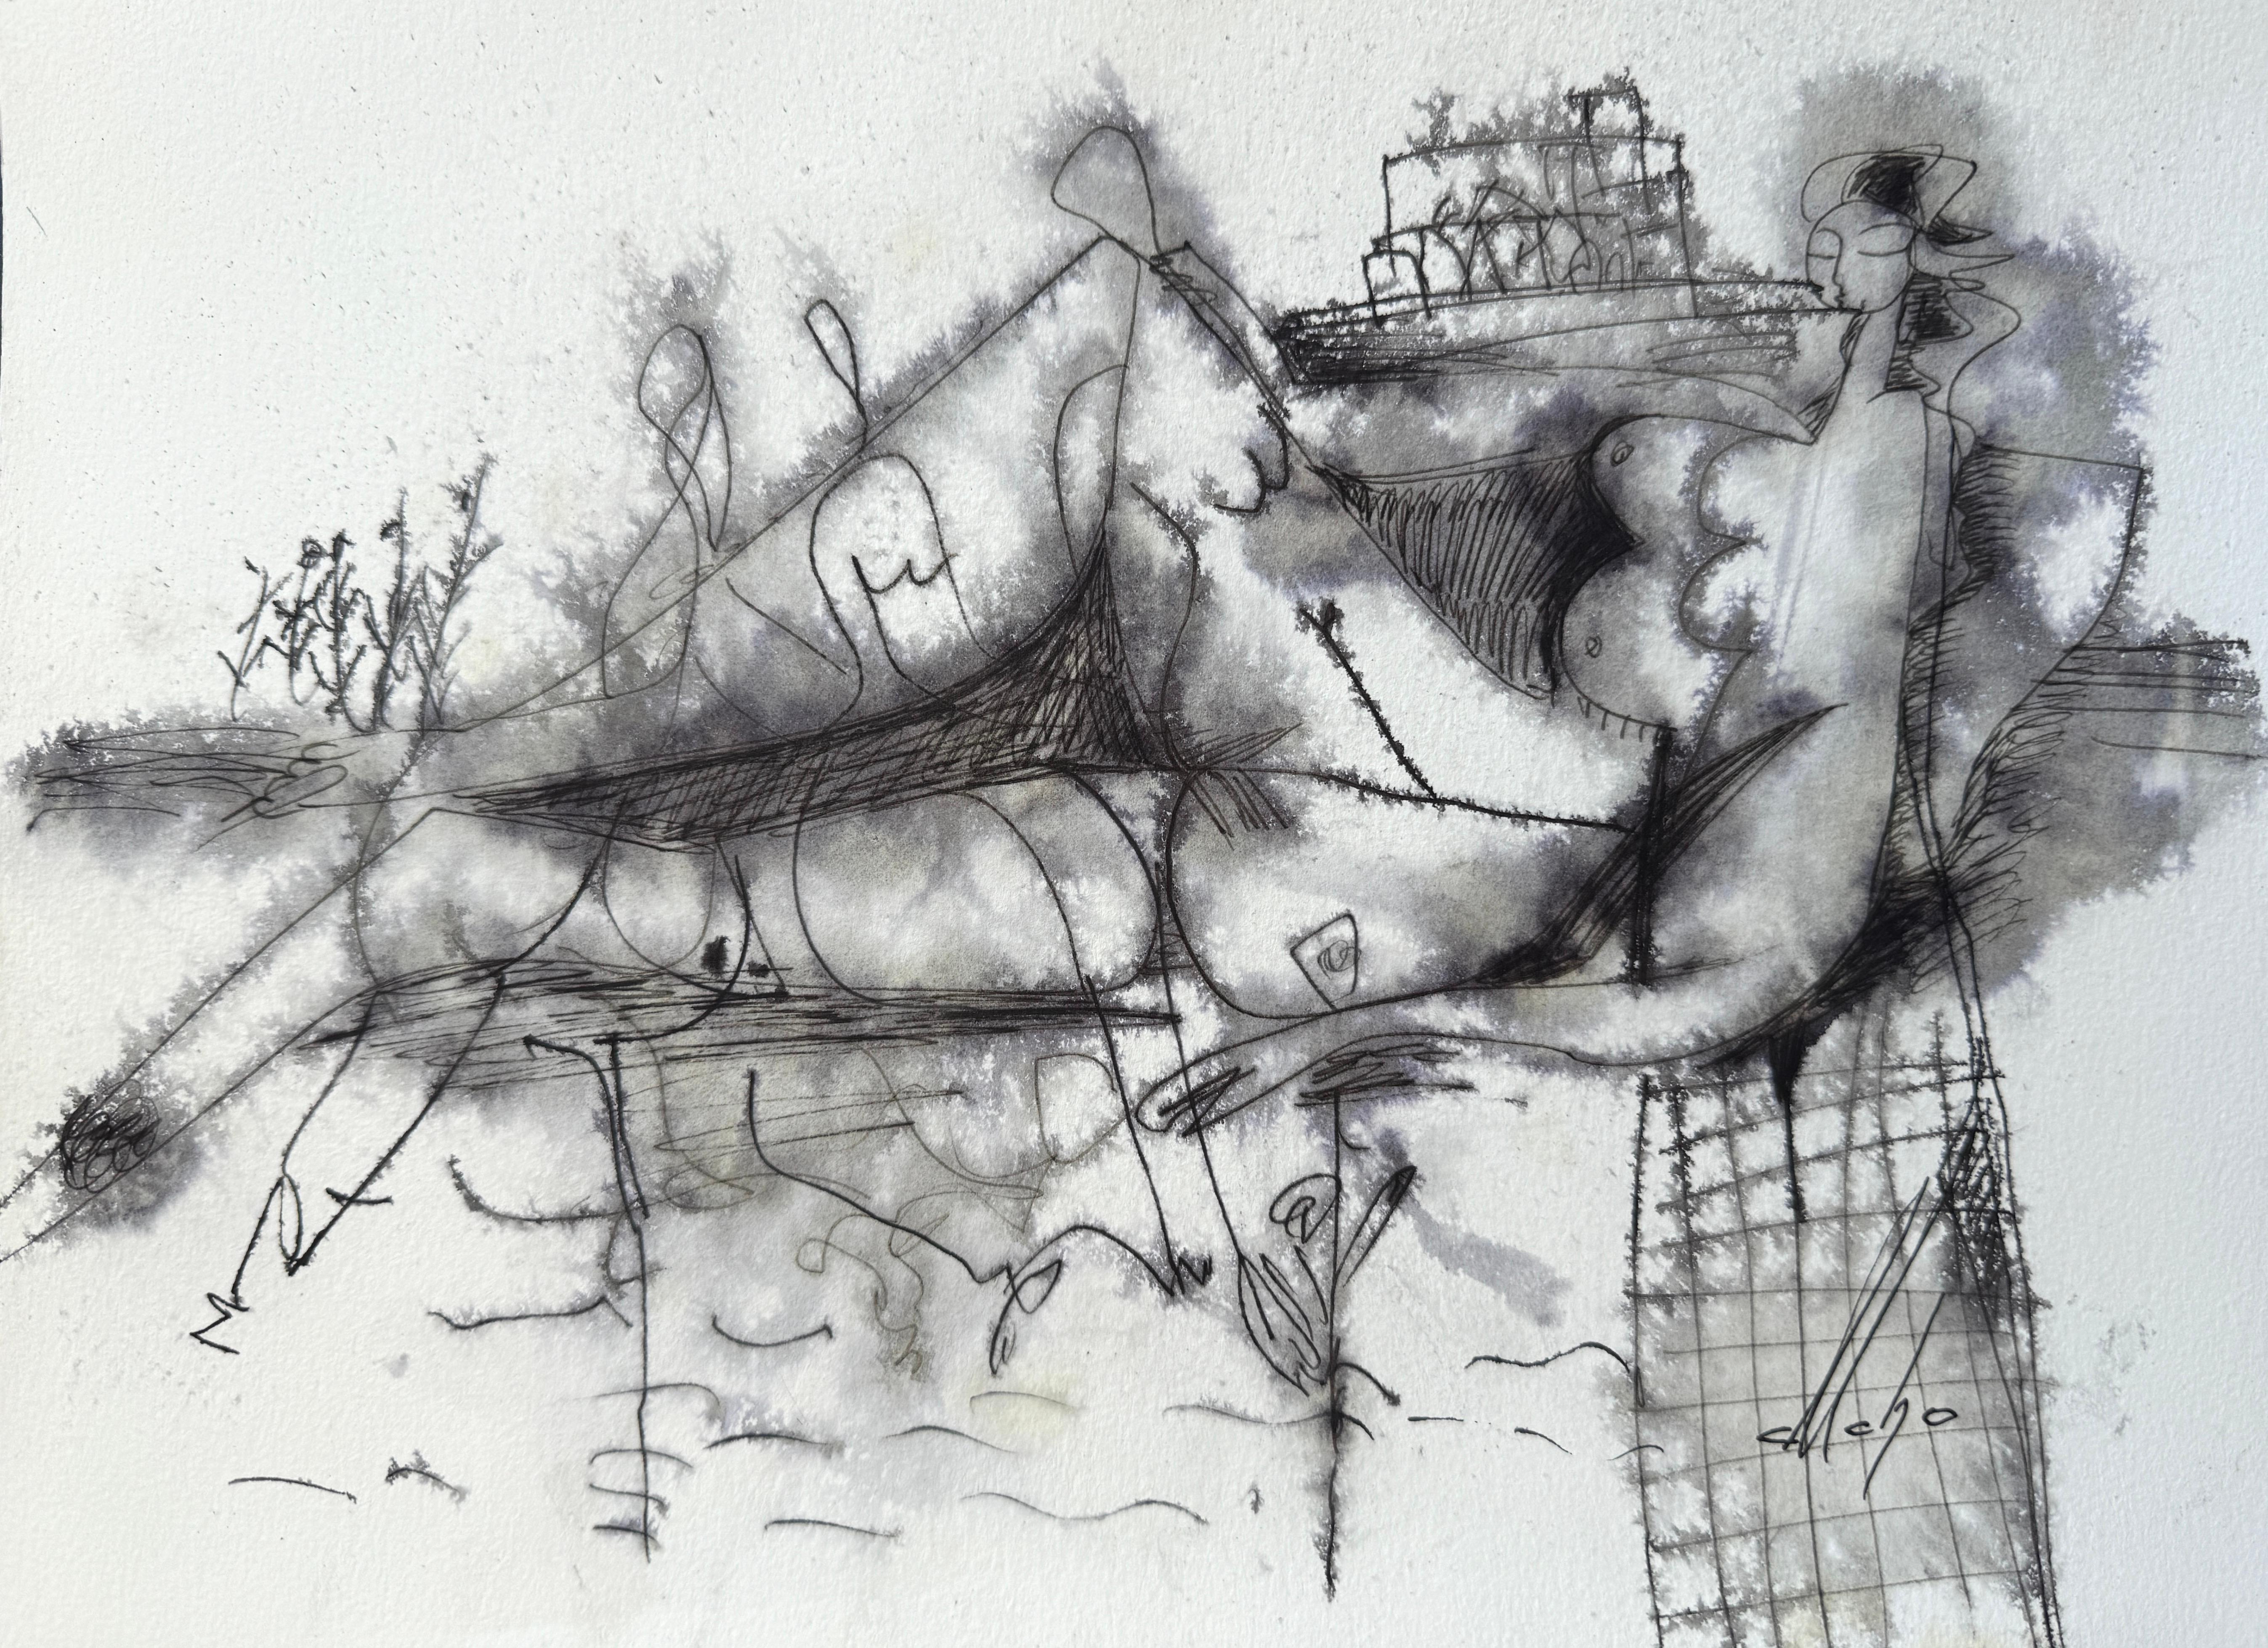 Memories, Figurative Original Painting, Ink on Paper, Black and White 